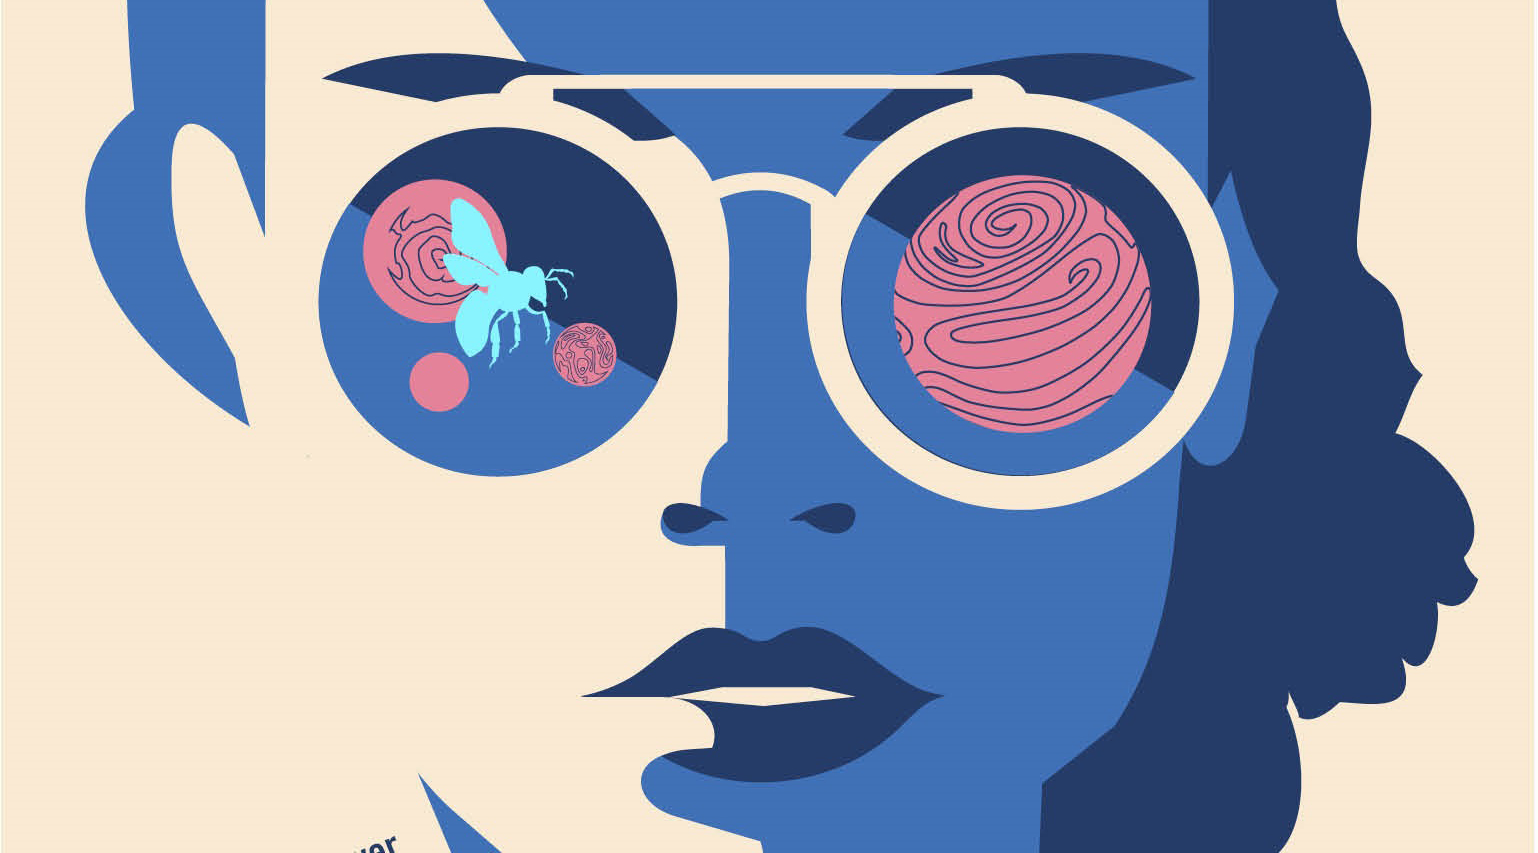 A stylized woman, half her face blue, the other half white, with glasses reflecting insects and planets, looks out at the viewer.